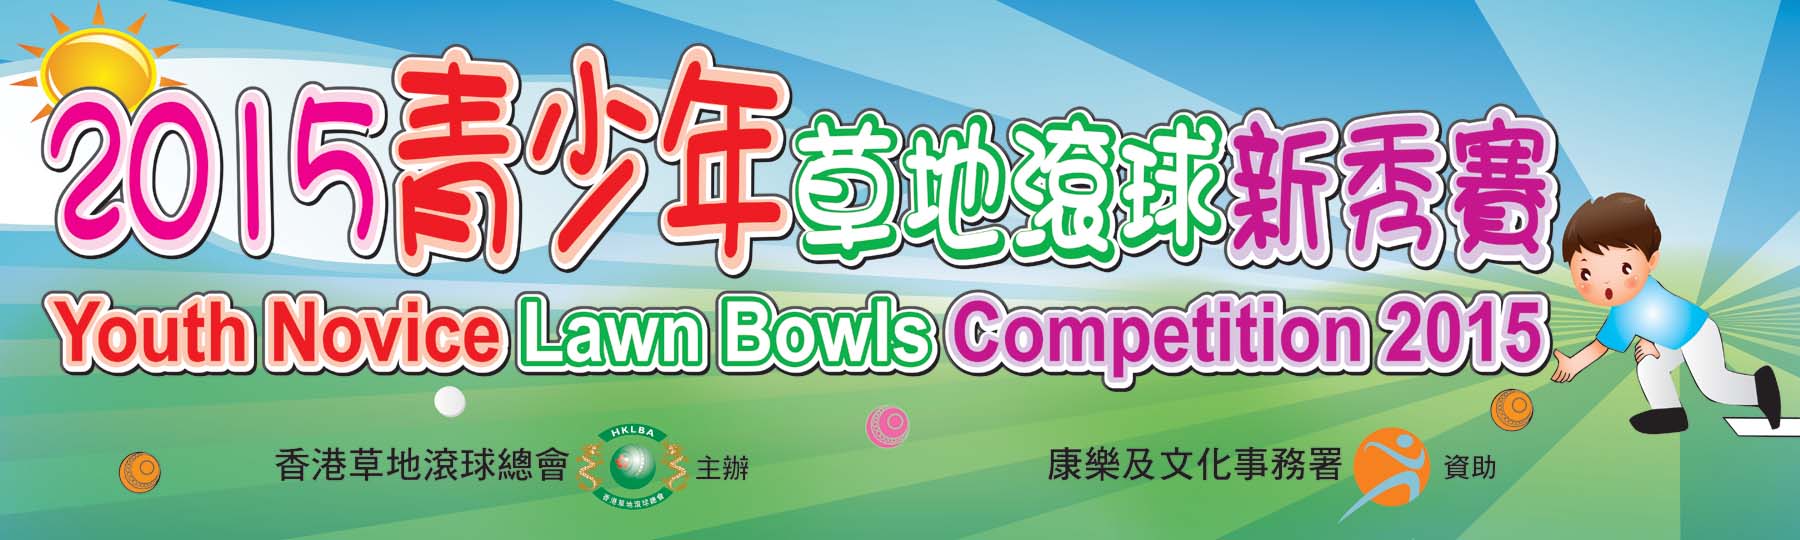 Youth Novice Lawn Bows Competition 2015 (Updated on 17/03/15)